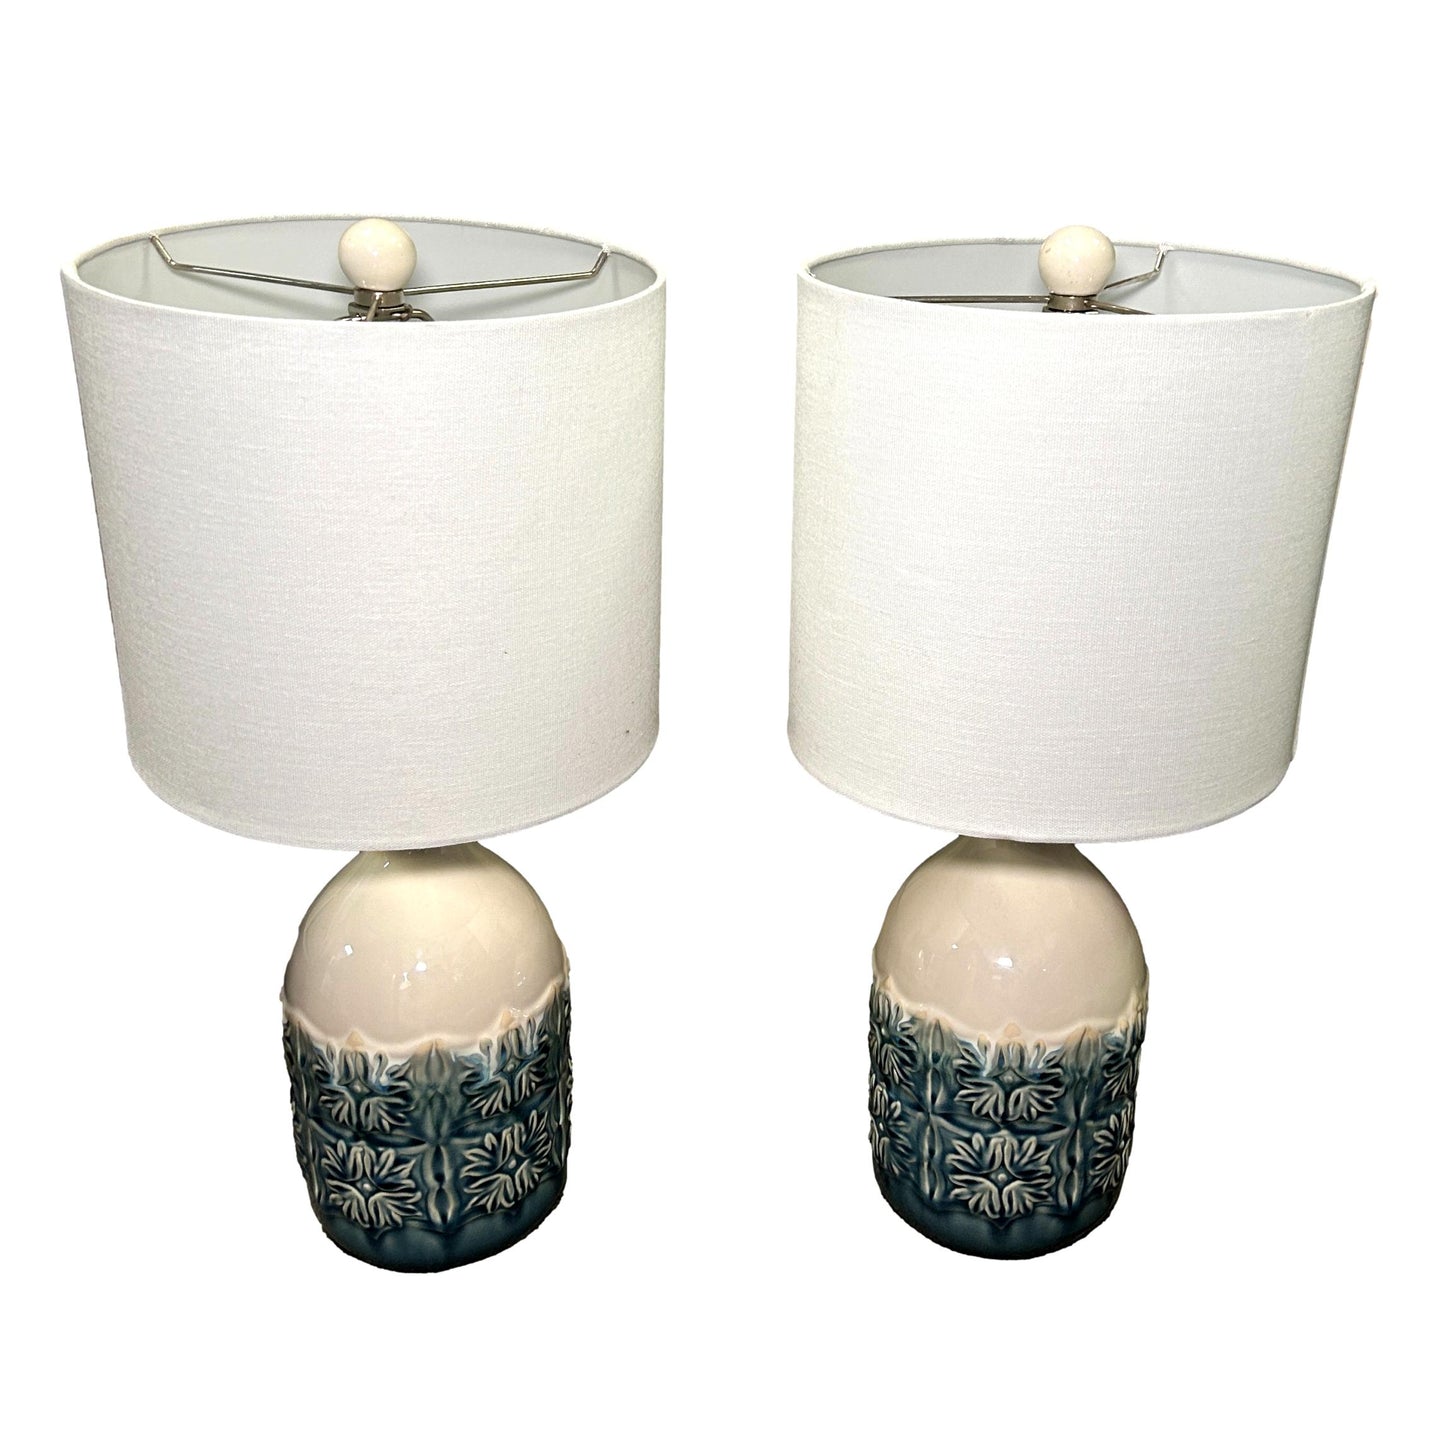 Pair Of White And Blue Ceramic Lamps